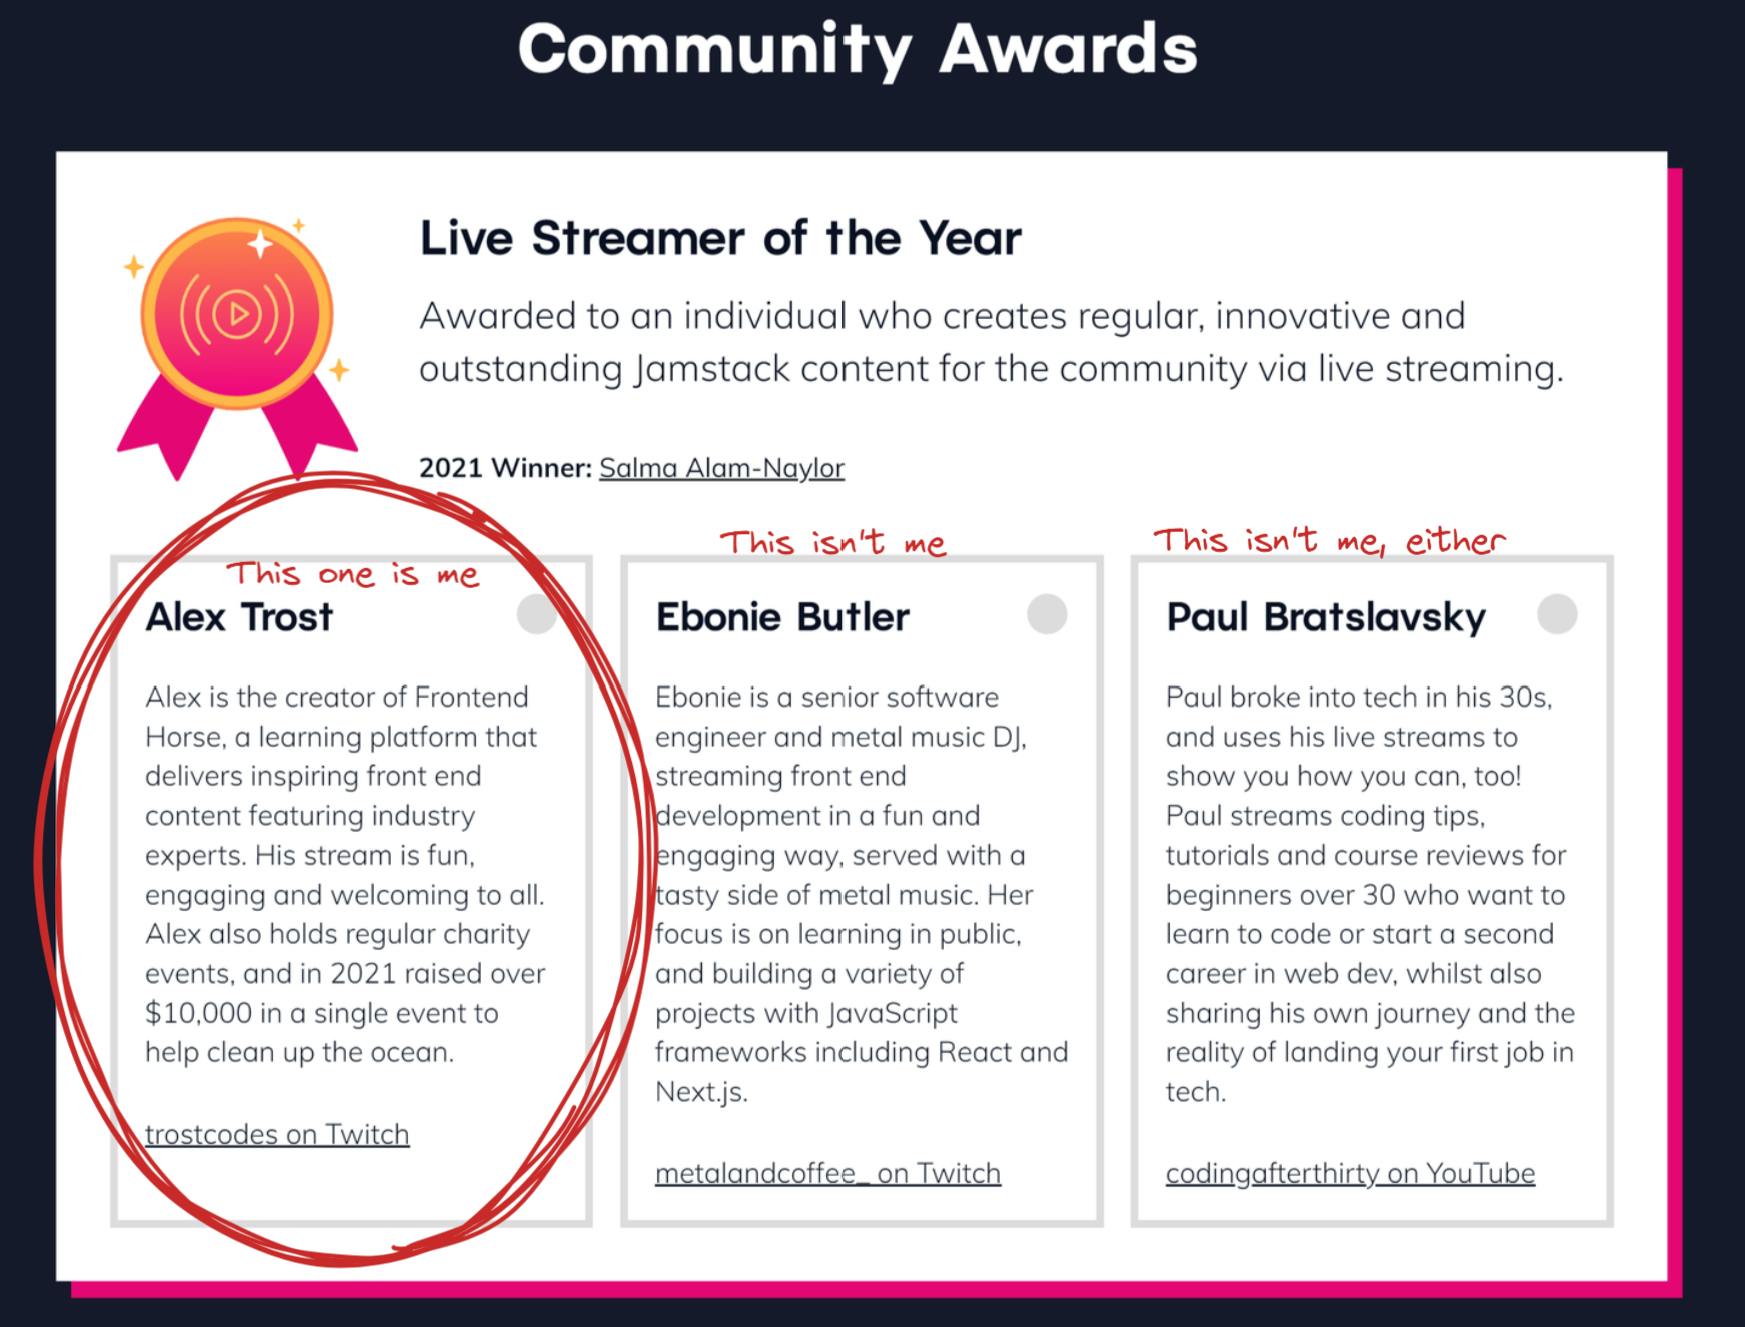 To vote for me you need to choose "Alex Trost" in the Live Streamer of the Year category. 